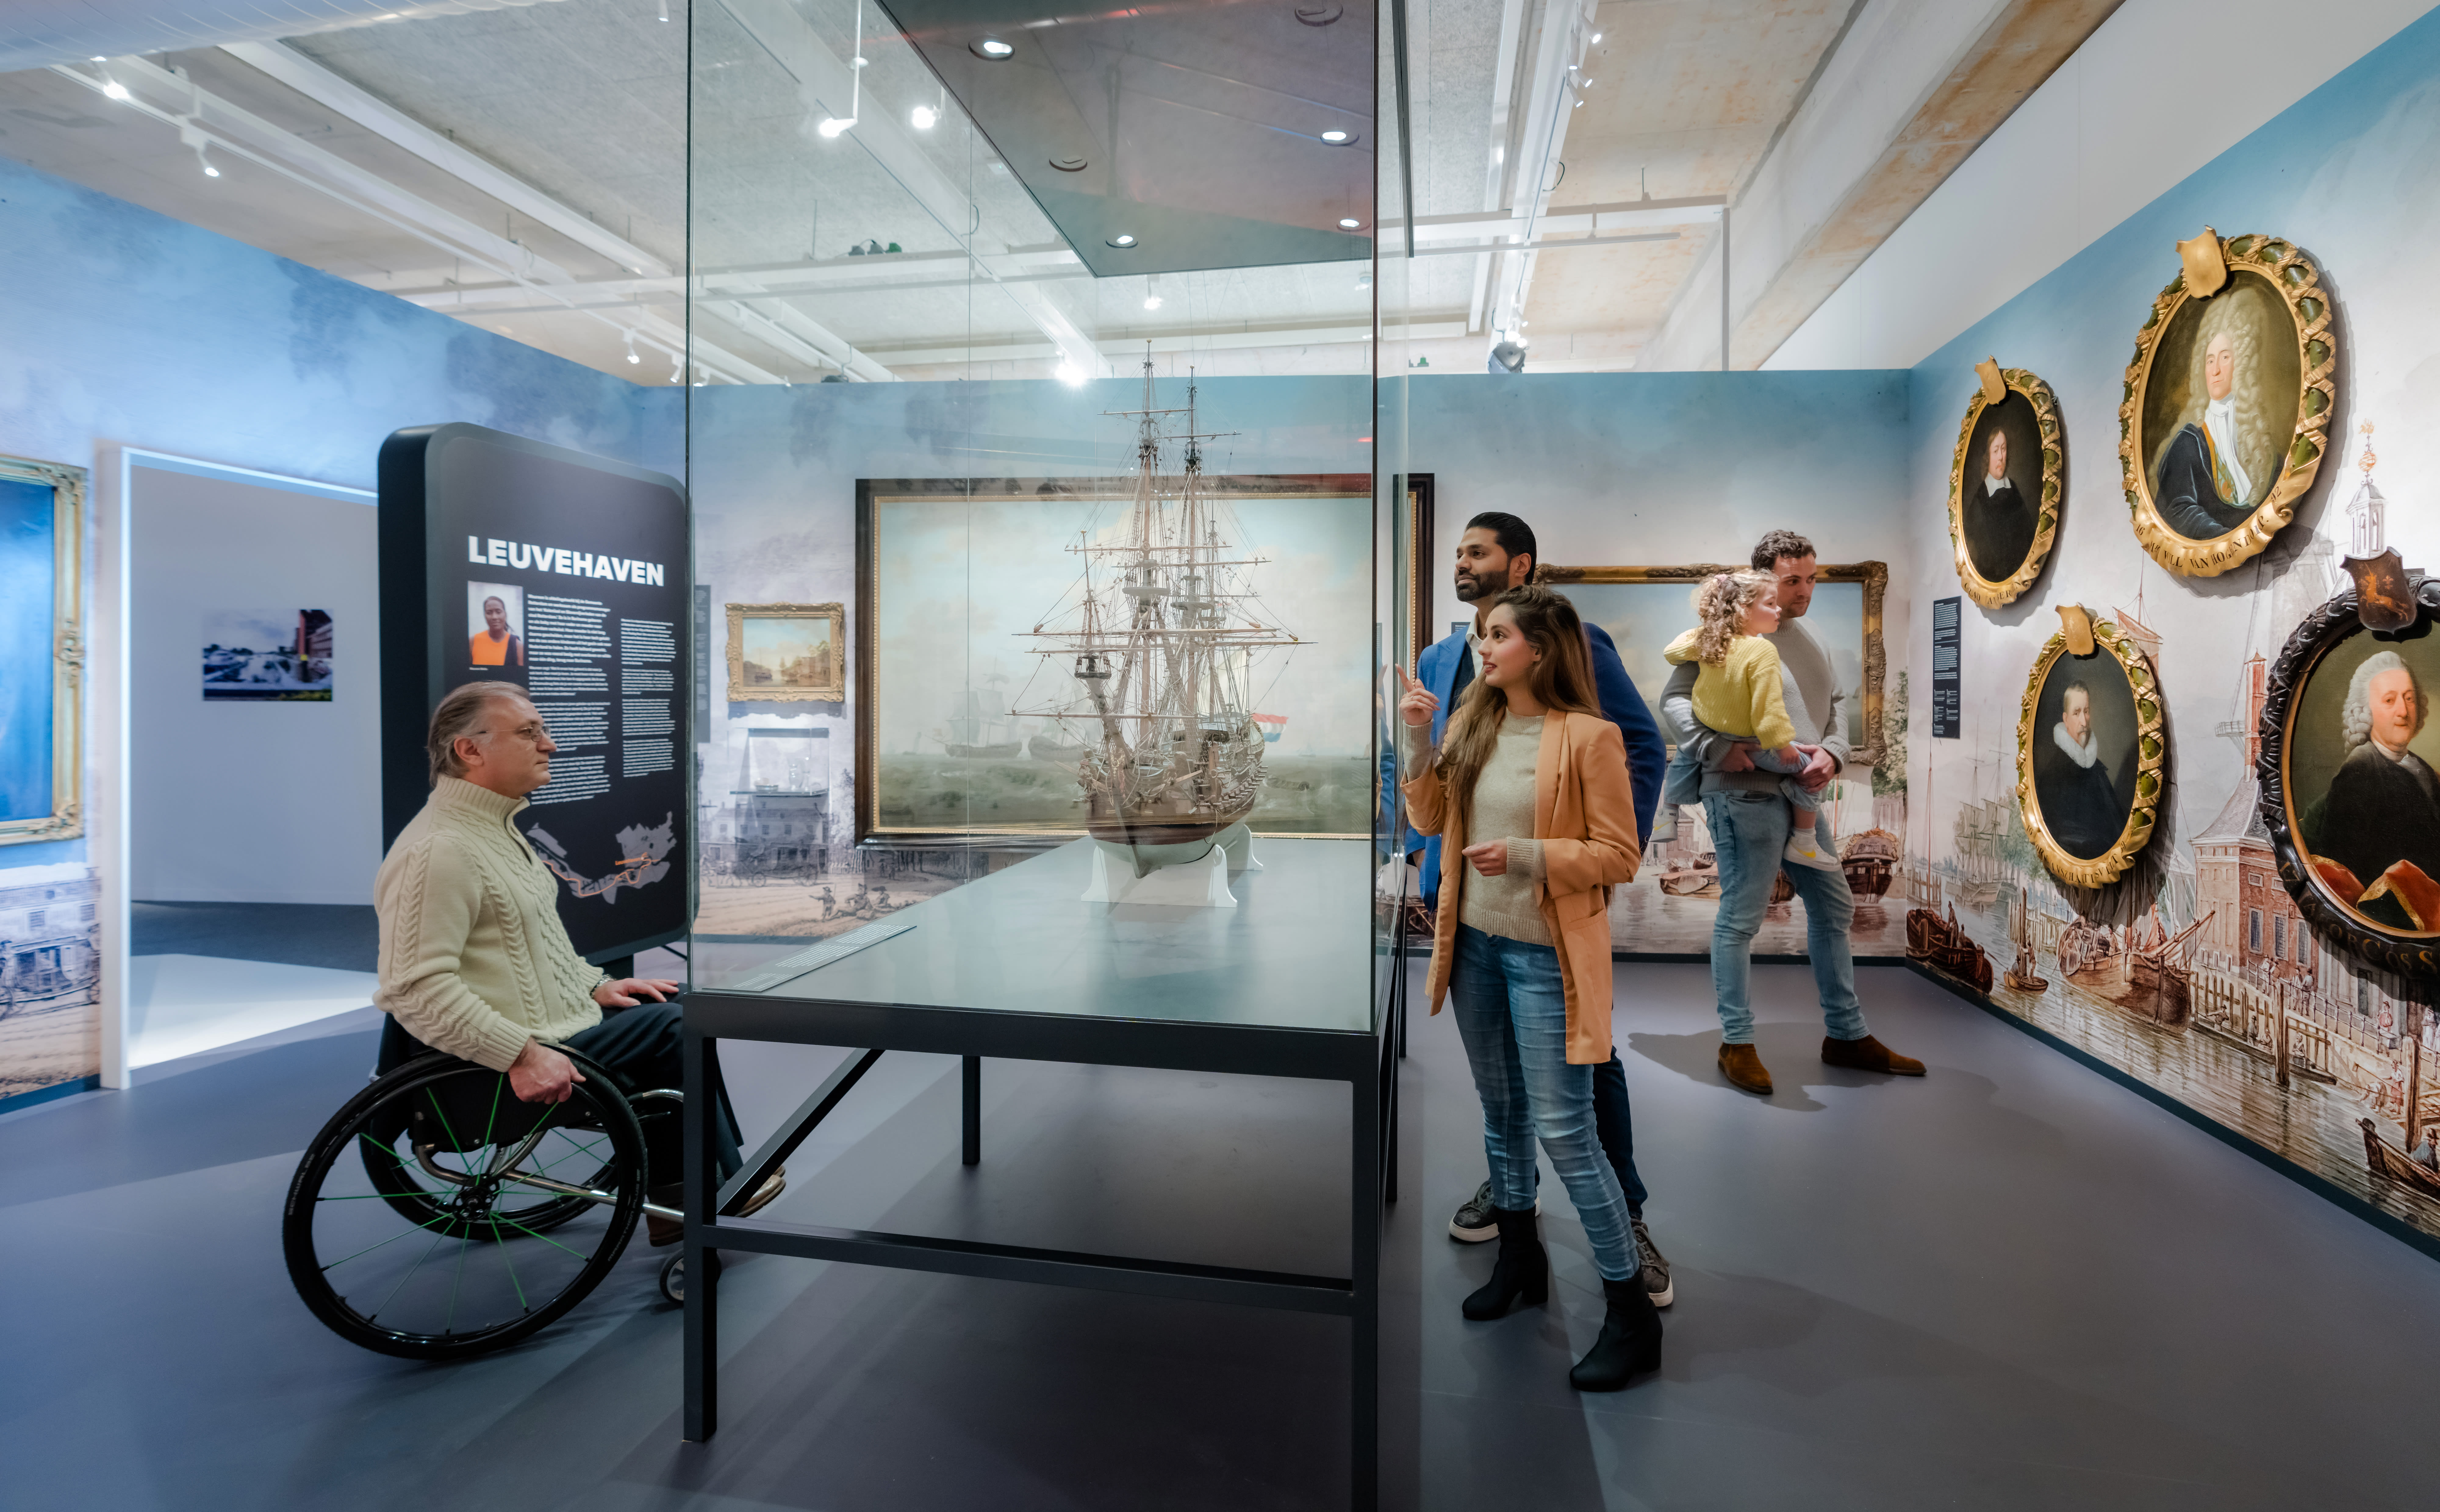 Visitors to the Maritime Museum, including one wheelchair user, look at a model ship in a glass case. Behind them are several portraits and an information board with the title Leuvehaven.